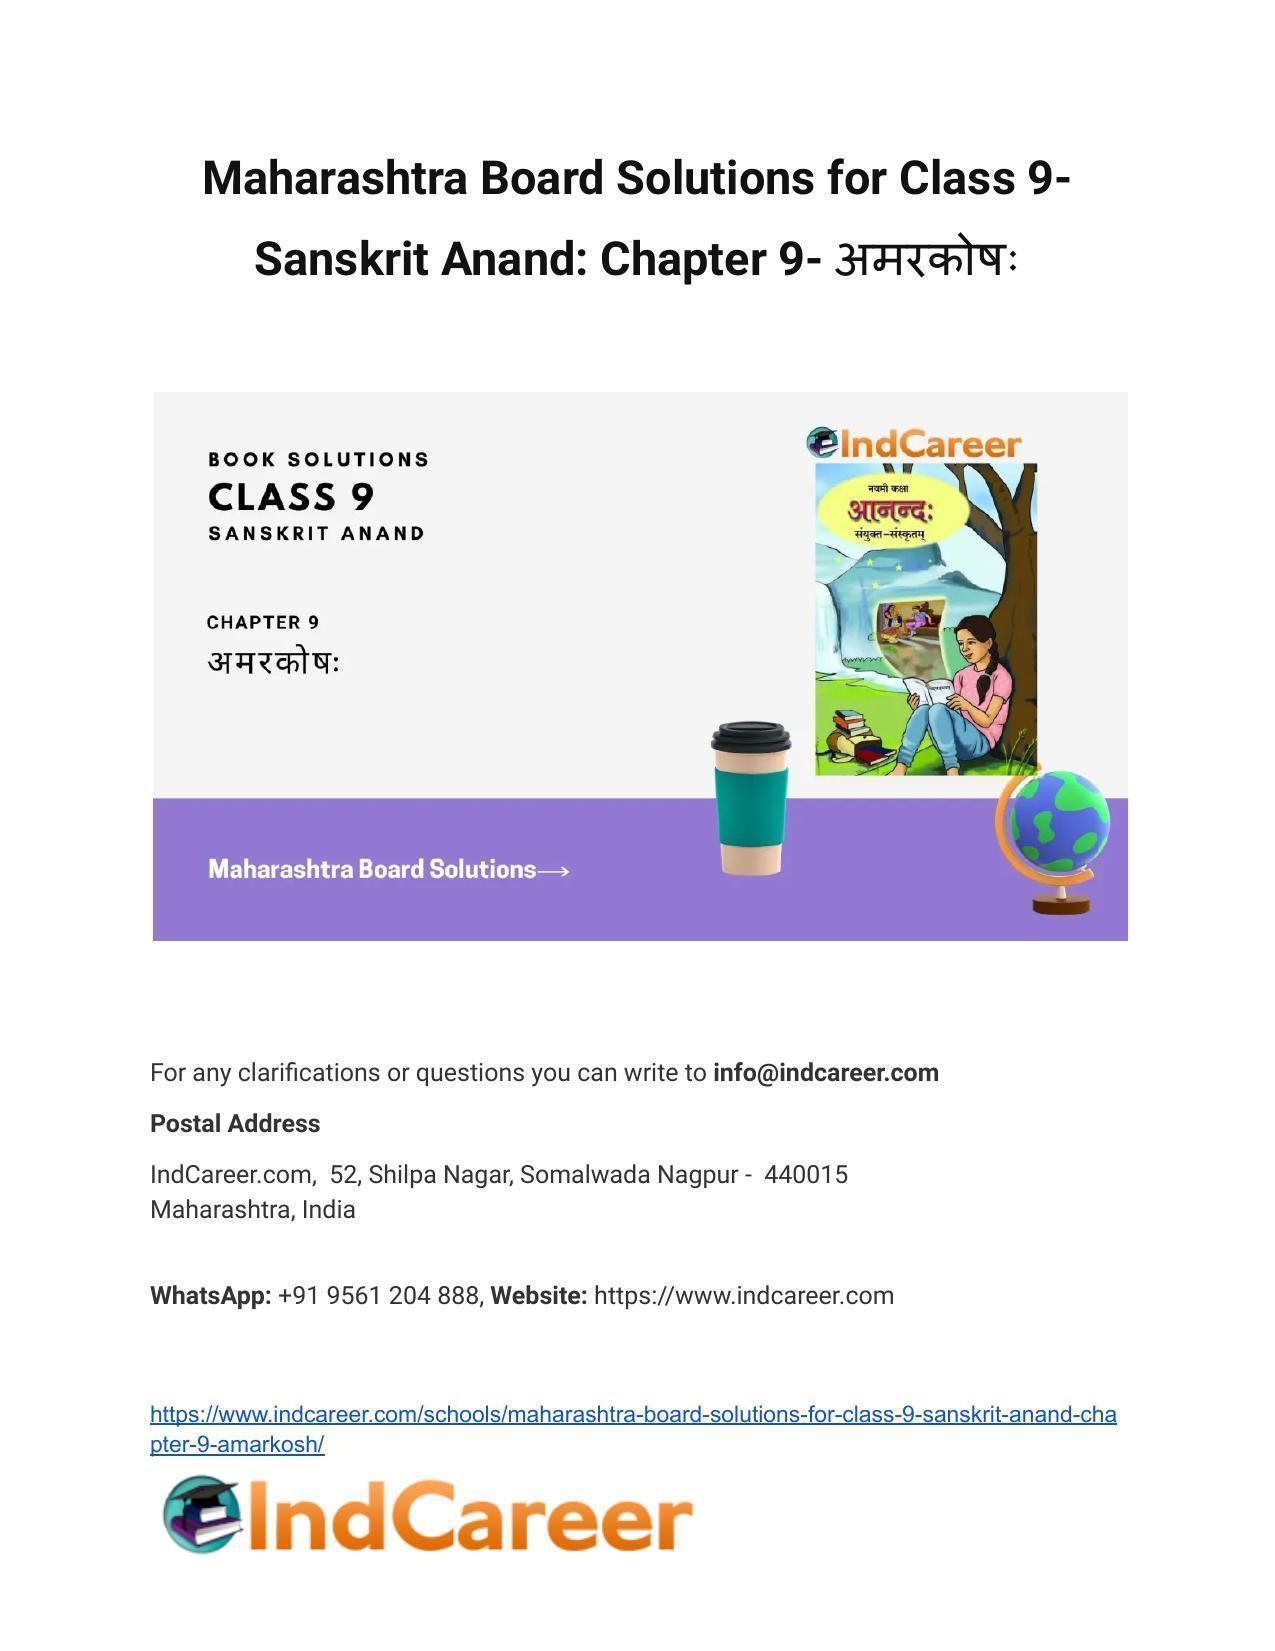 Maharashtra Board Solutions for Class 9- Sanskrit Anand: Chapter 9- अमरकोषः - Page 1